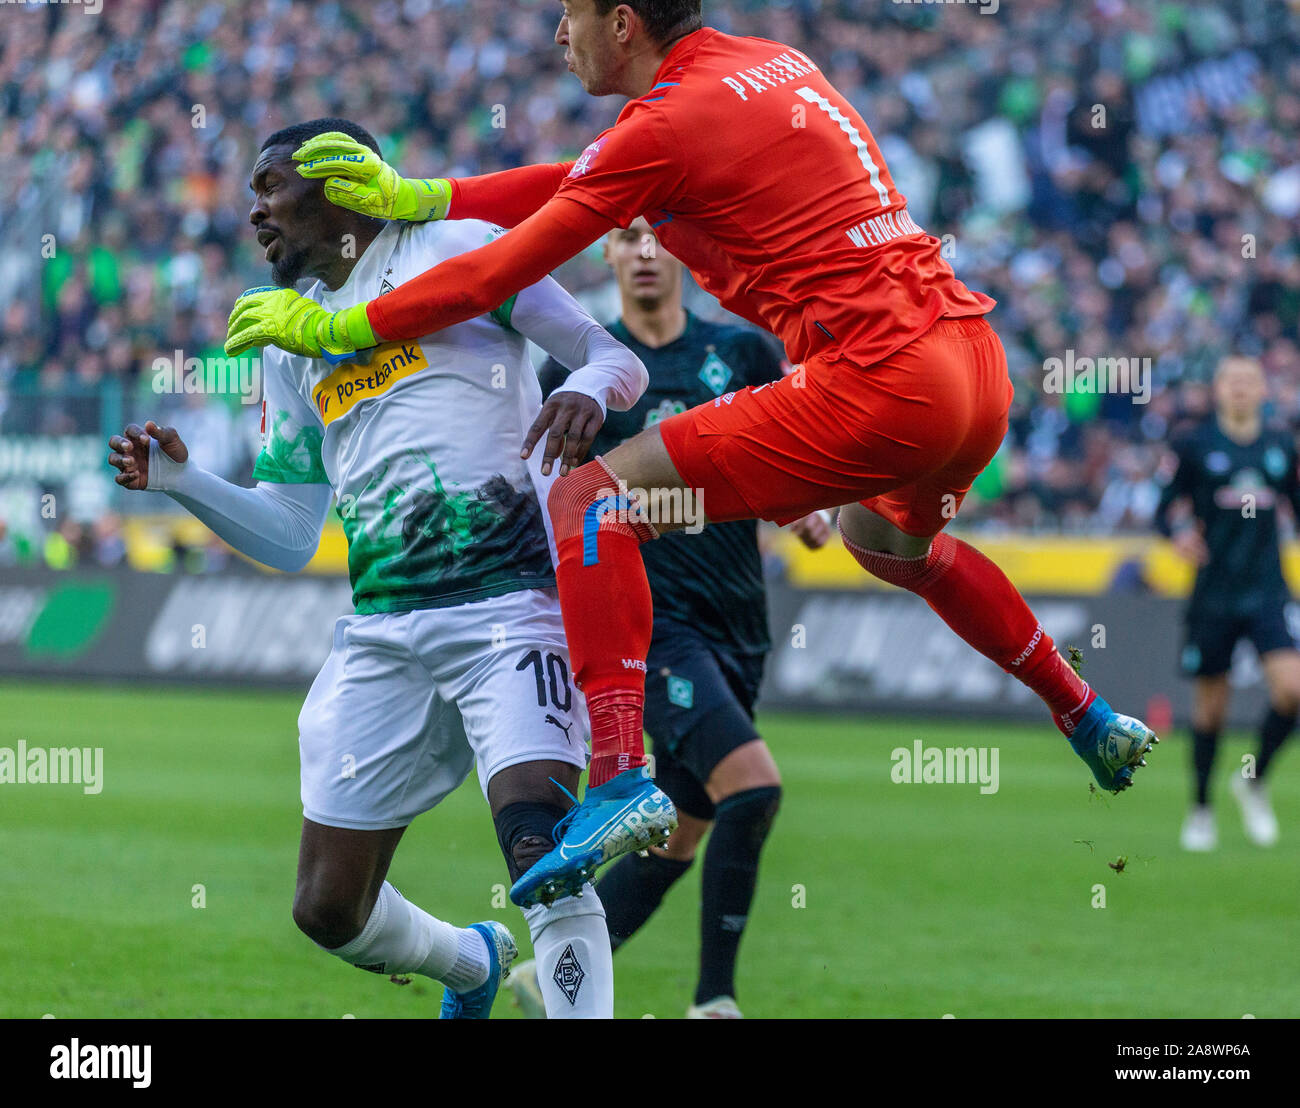 sports, football, Bundesliga, 2019/2020, Borussia Moenchengladbach vs. SV Werder Bremen 3-1, Stadium Borussia Park, scene of the match before the 2-0 goal by Patrick Herrmann (MG) not pictured, keeper Jiri Pavlenka (SVW) right and Marcus Thuram (MG), behind Marco Friedl (SVW), DFL REGULATIONS PROHIBIT ANY USE OF PHOTOGRAPHS AS IMAGE SEQUENCES AND/OR QUASI-VIDEO Stock Photo